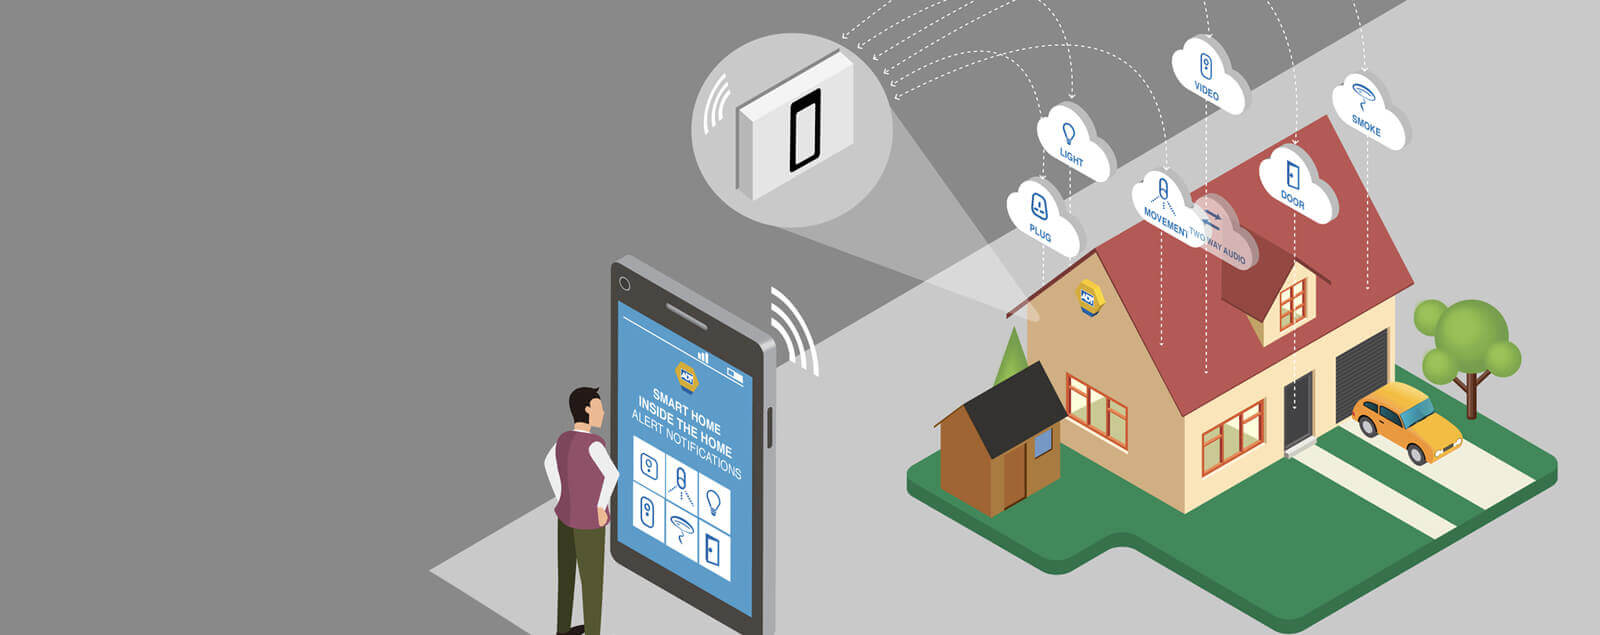 Graphic of man controlling ADT smart home with smartphone